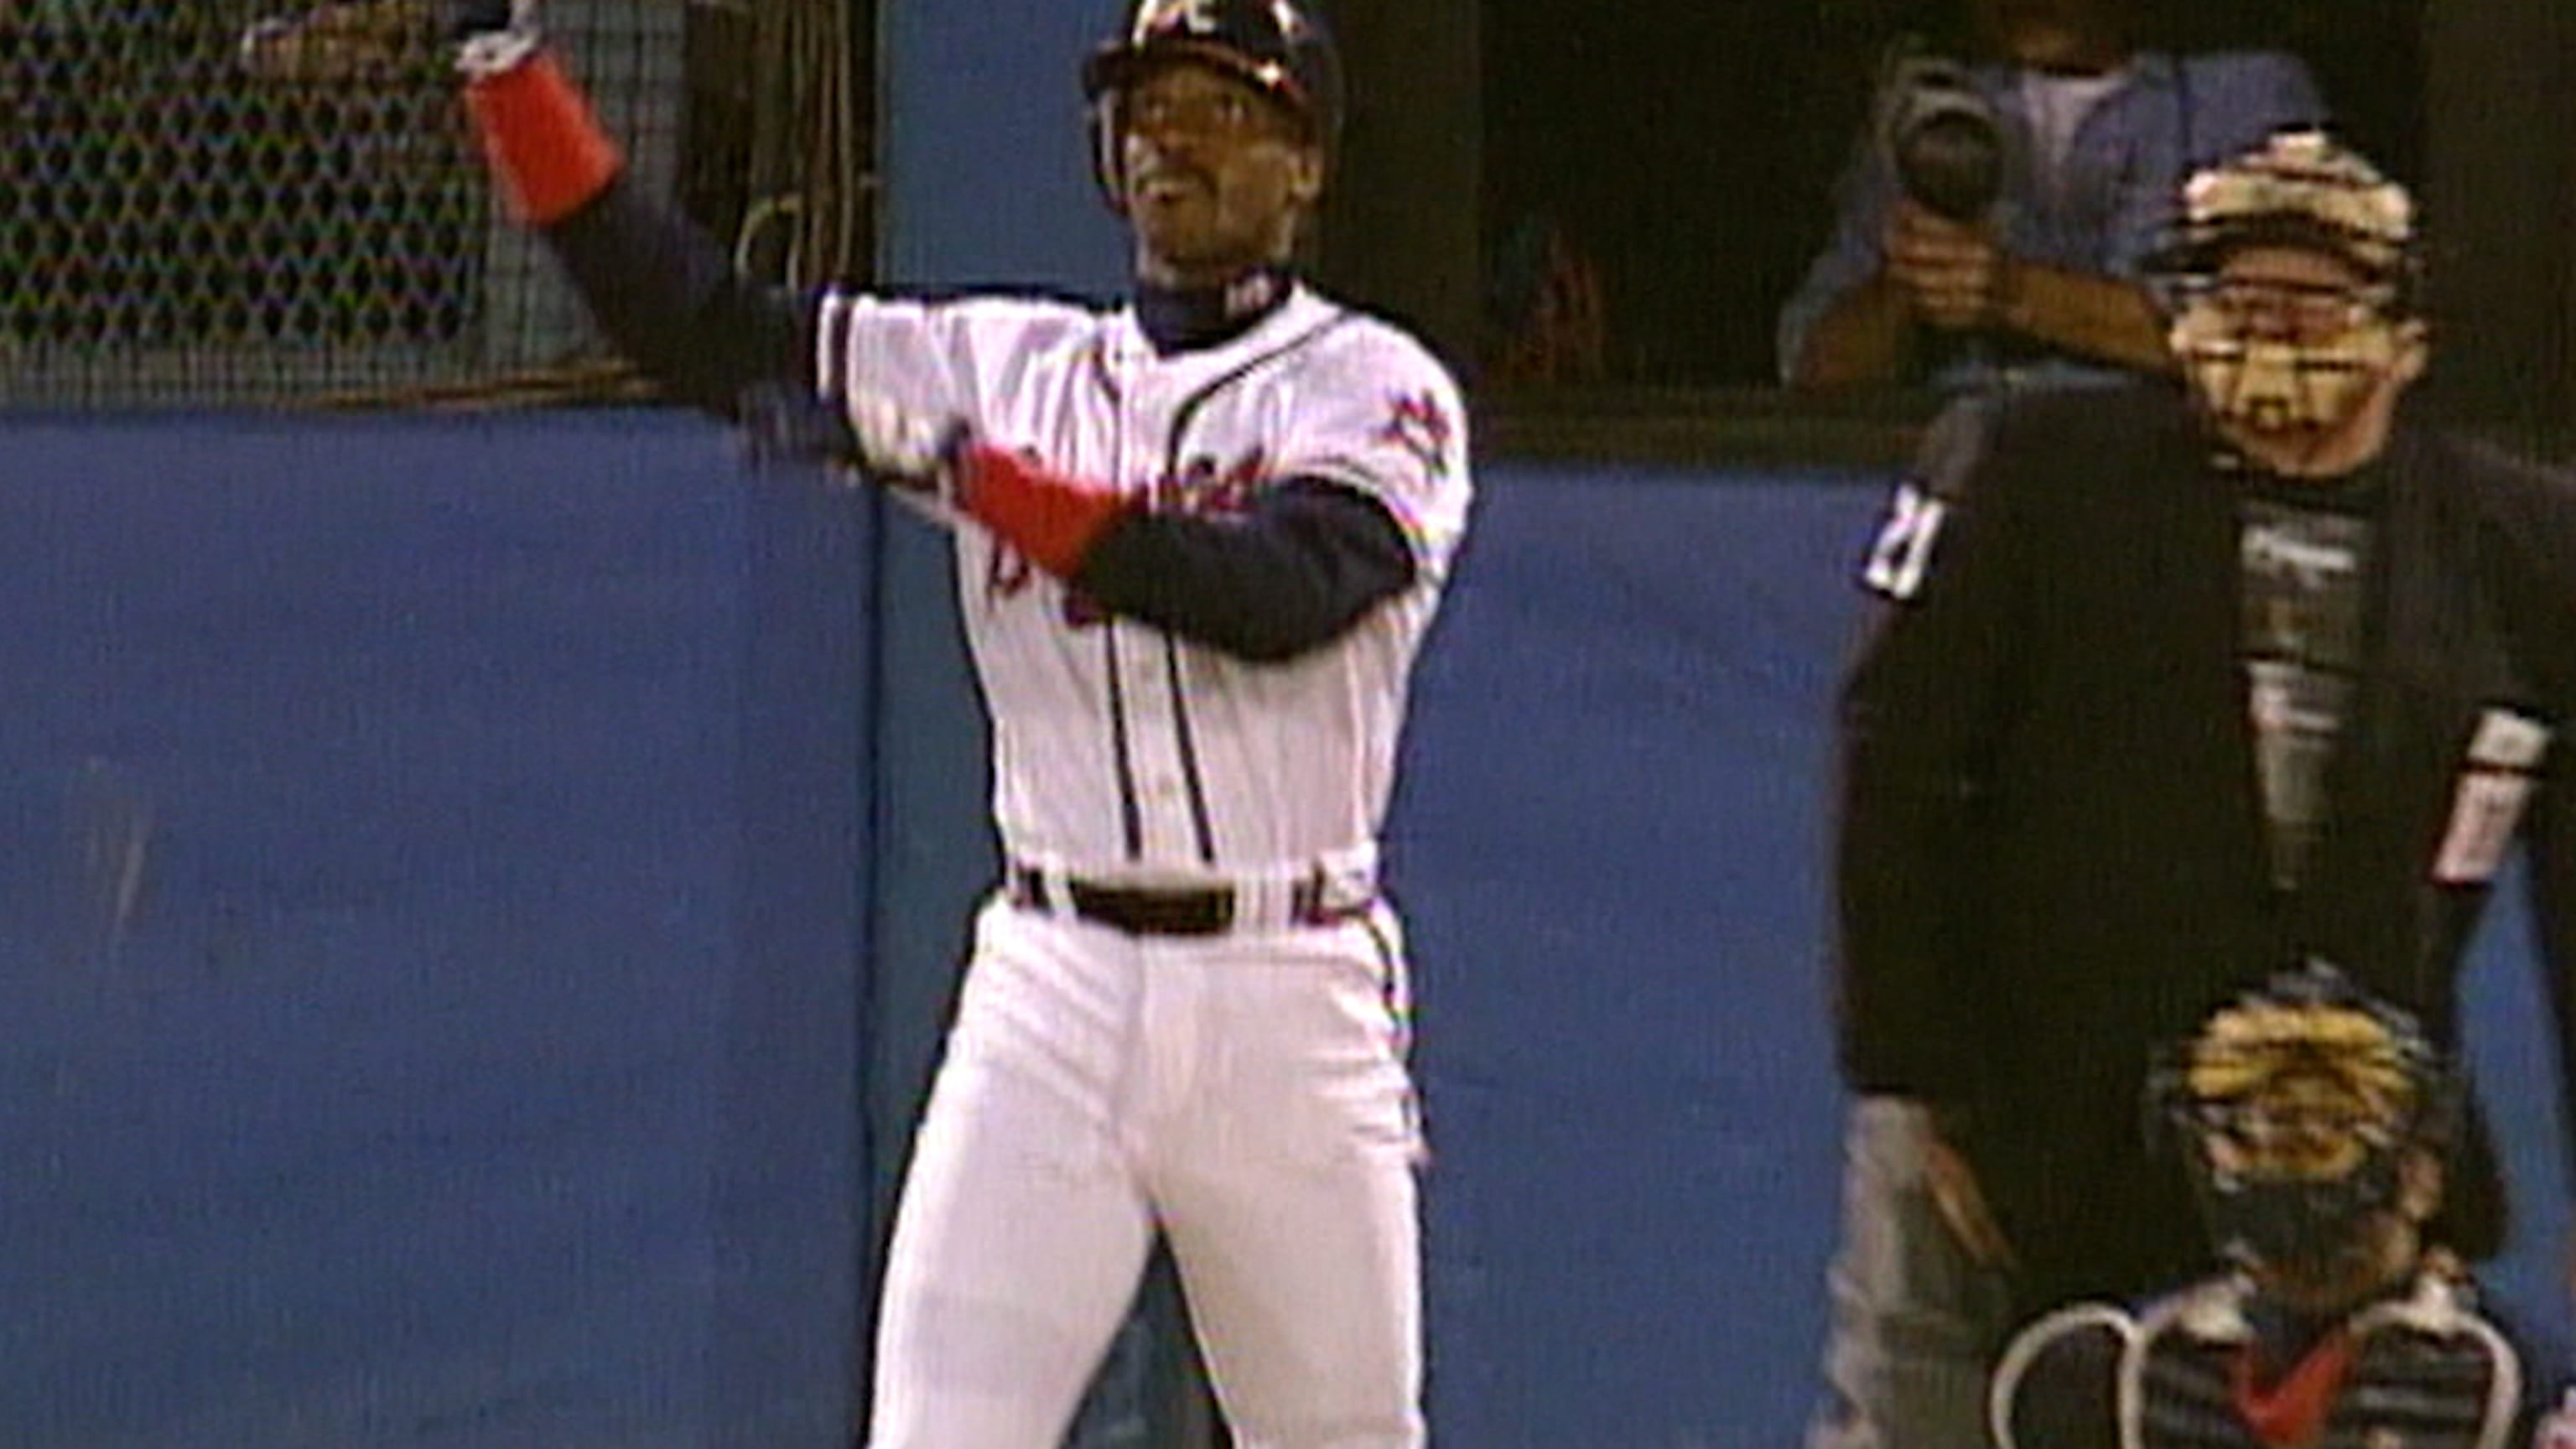 Fred McGriff elected to Hall of Fame 2023 Class